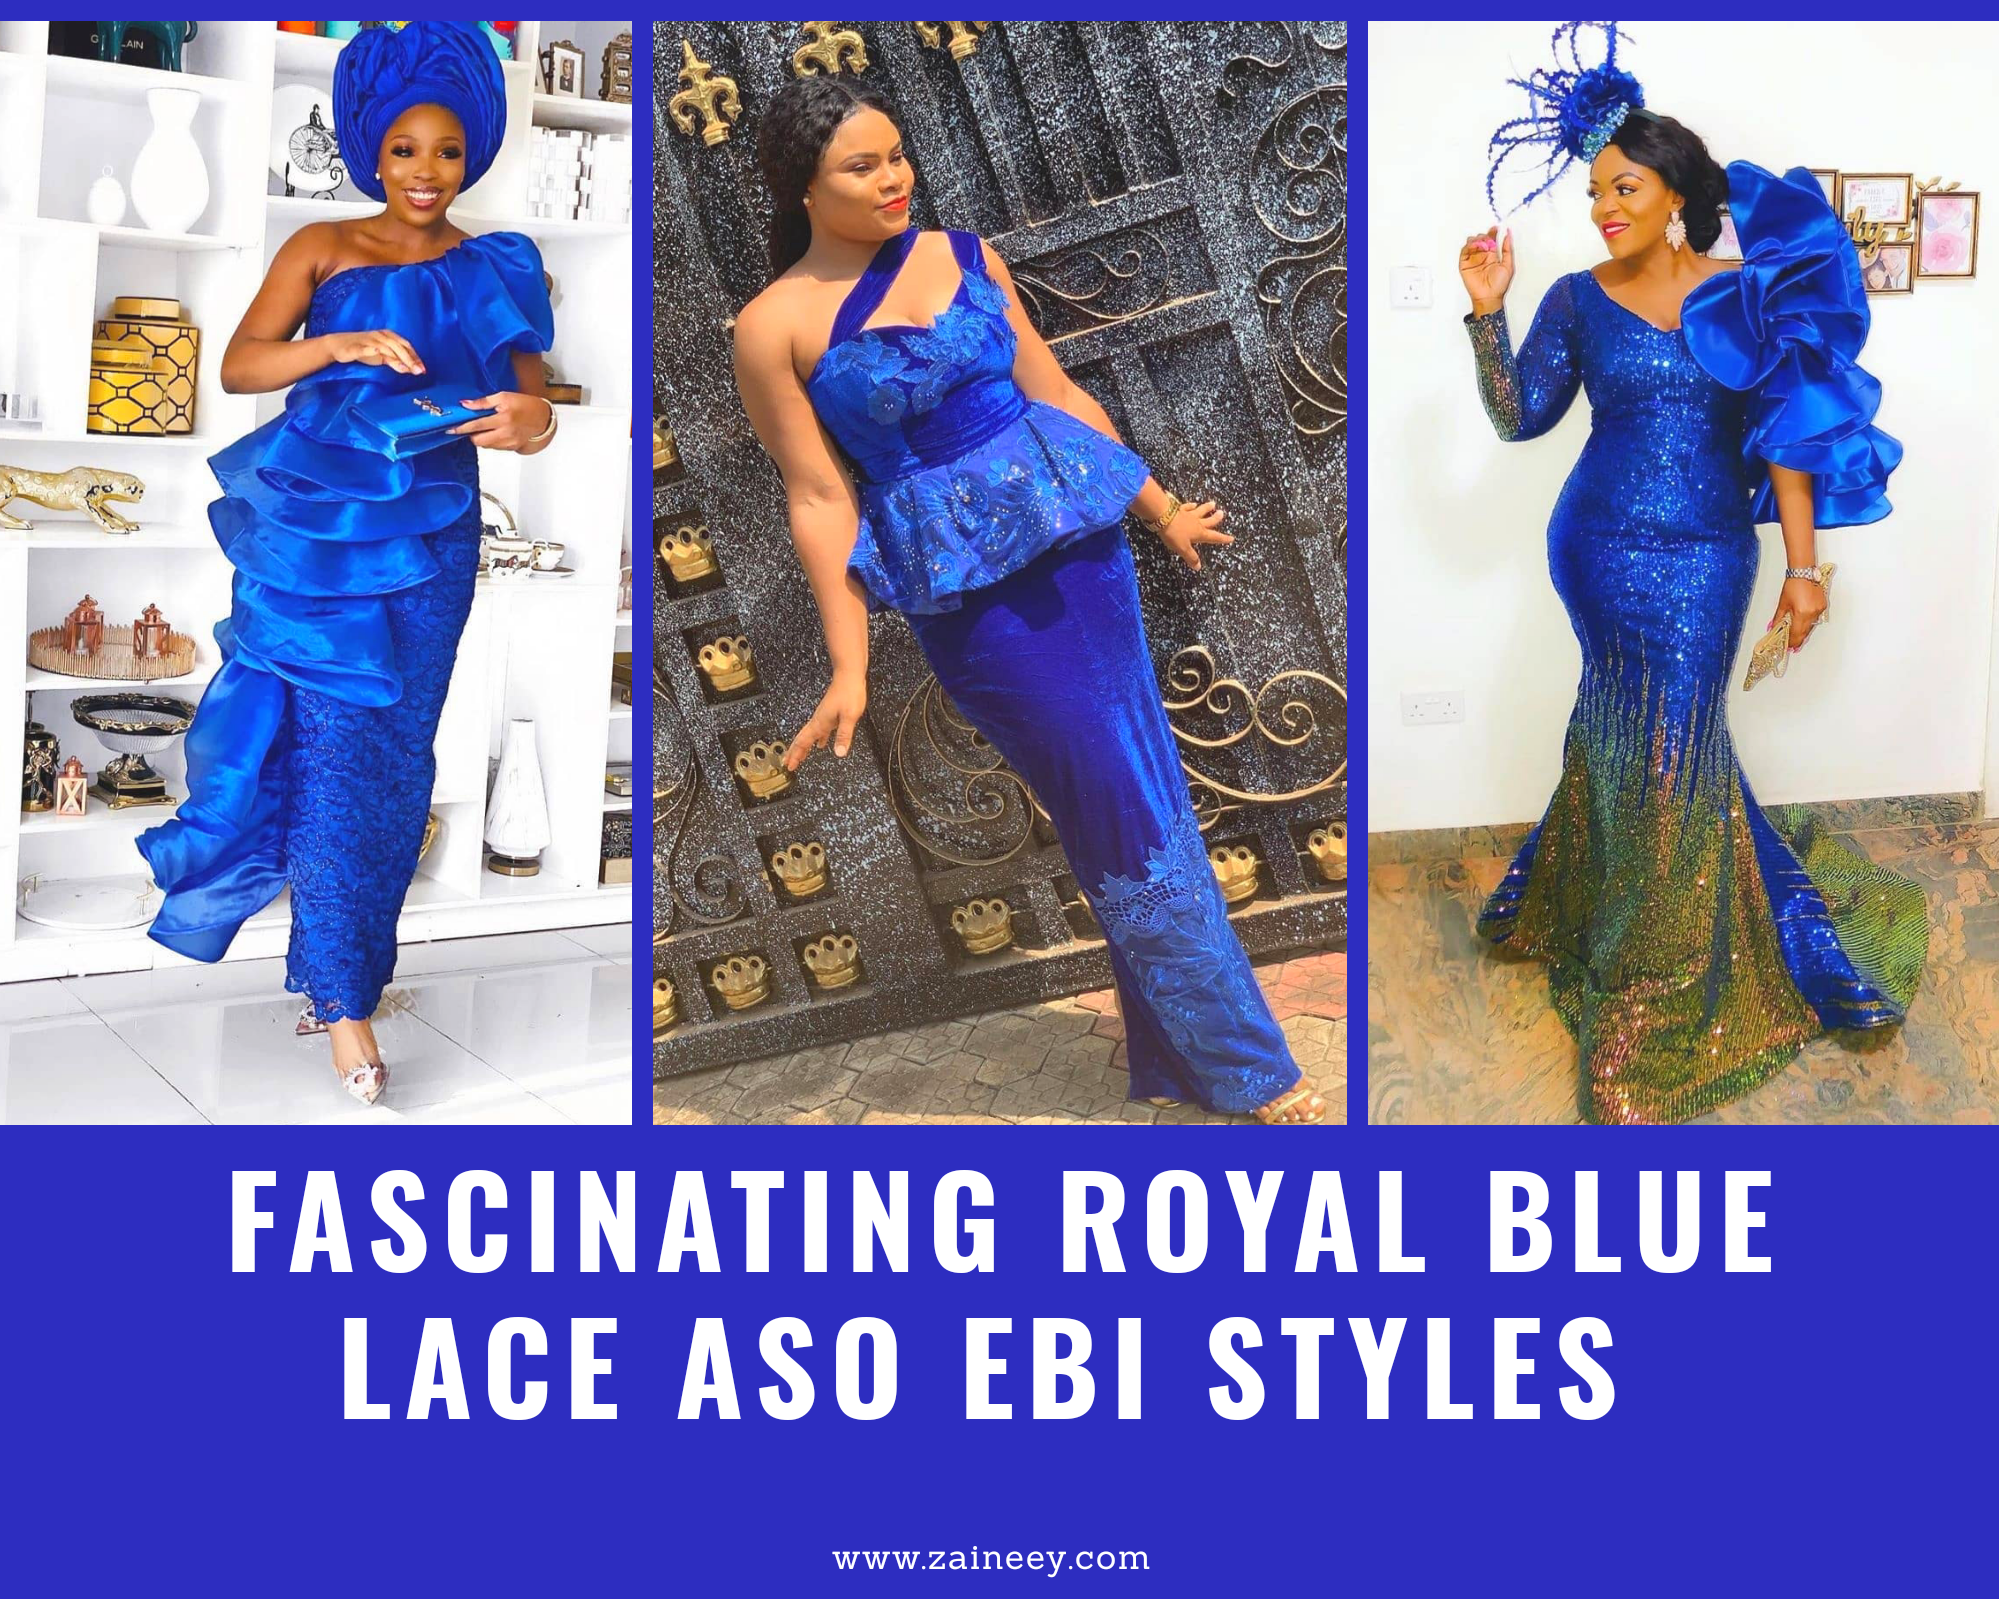 Blue Lace Aso Ebi Styles - Royal Blue Lace Styles for Wedding and